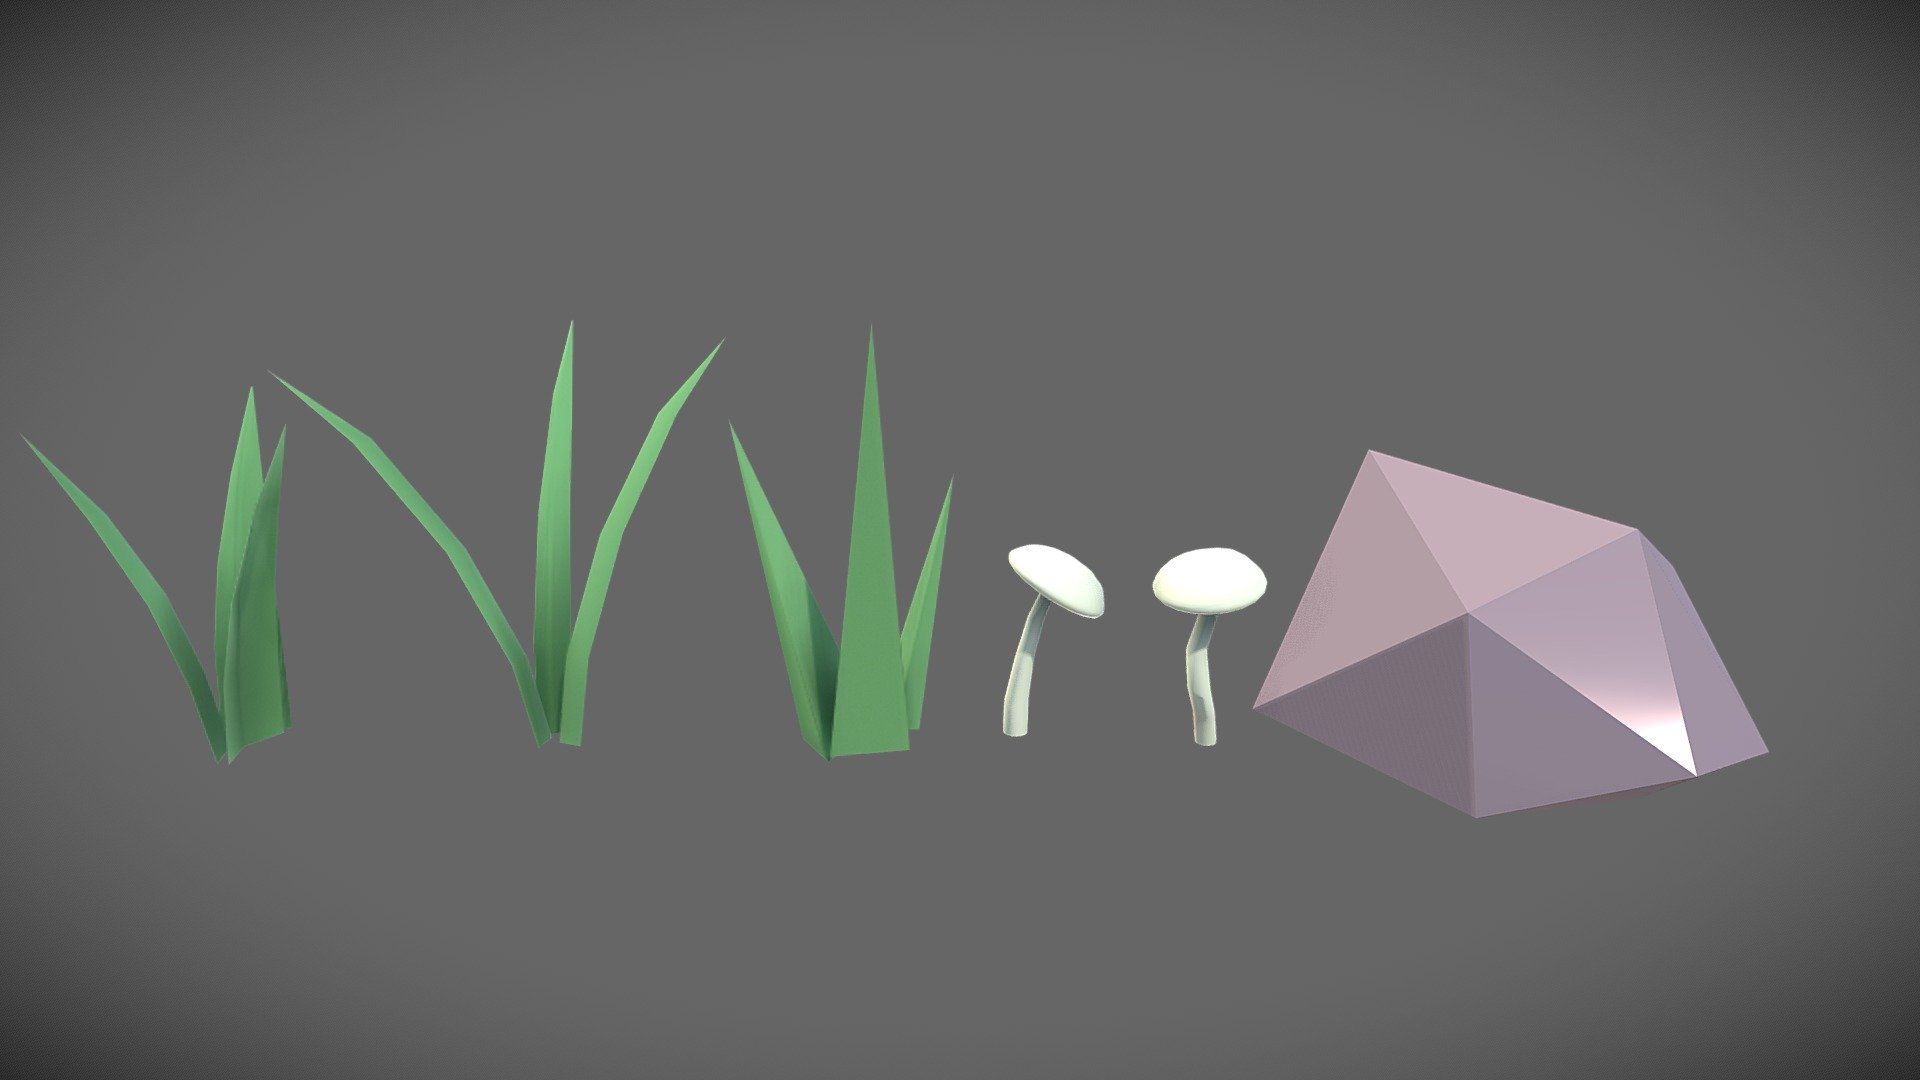 Model layout of low poly rock, grass, and mushroomsfrom my BFA thesis project, Scopic.

Modeled in Maya and Blender - Scopic Environment Model Layout - 3D model by olliepageart 3d model